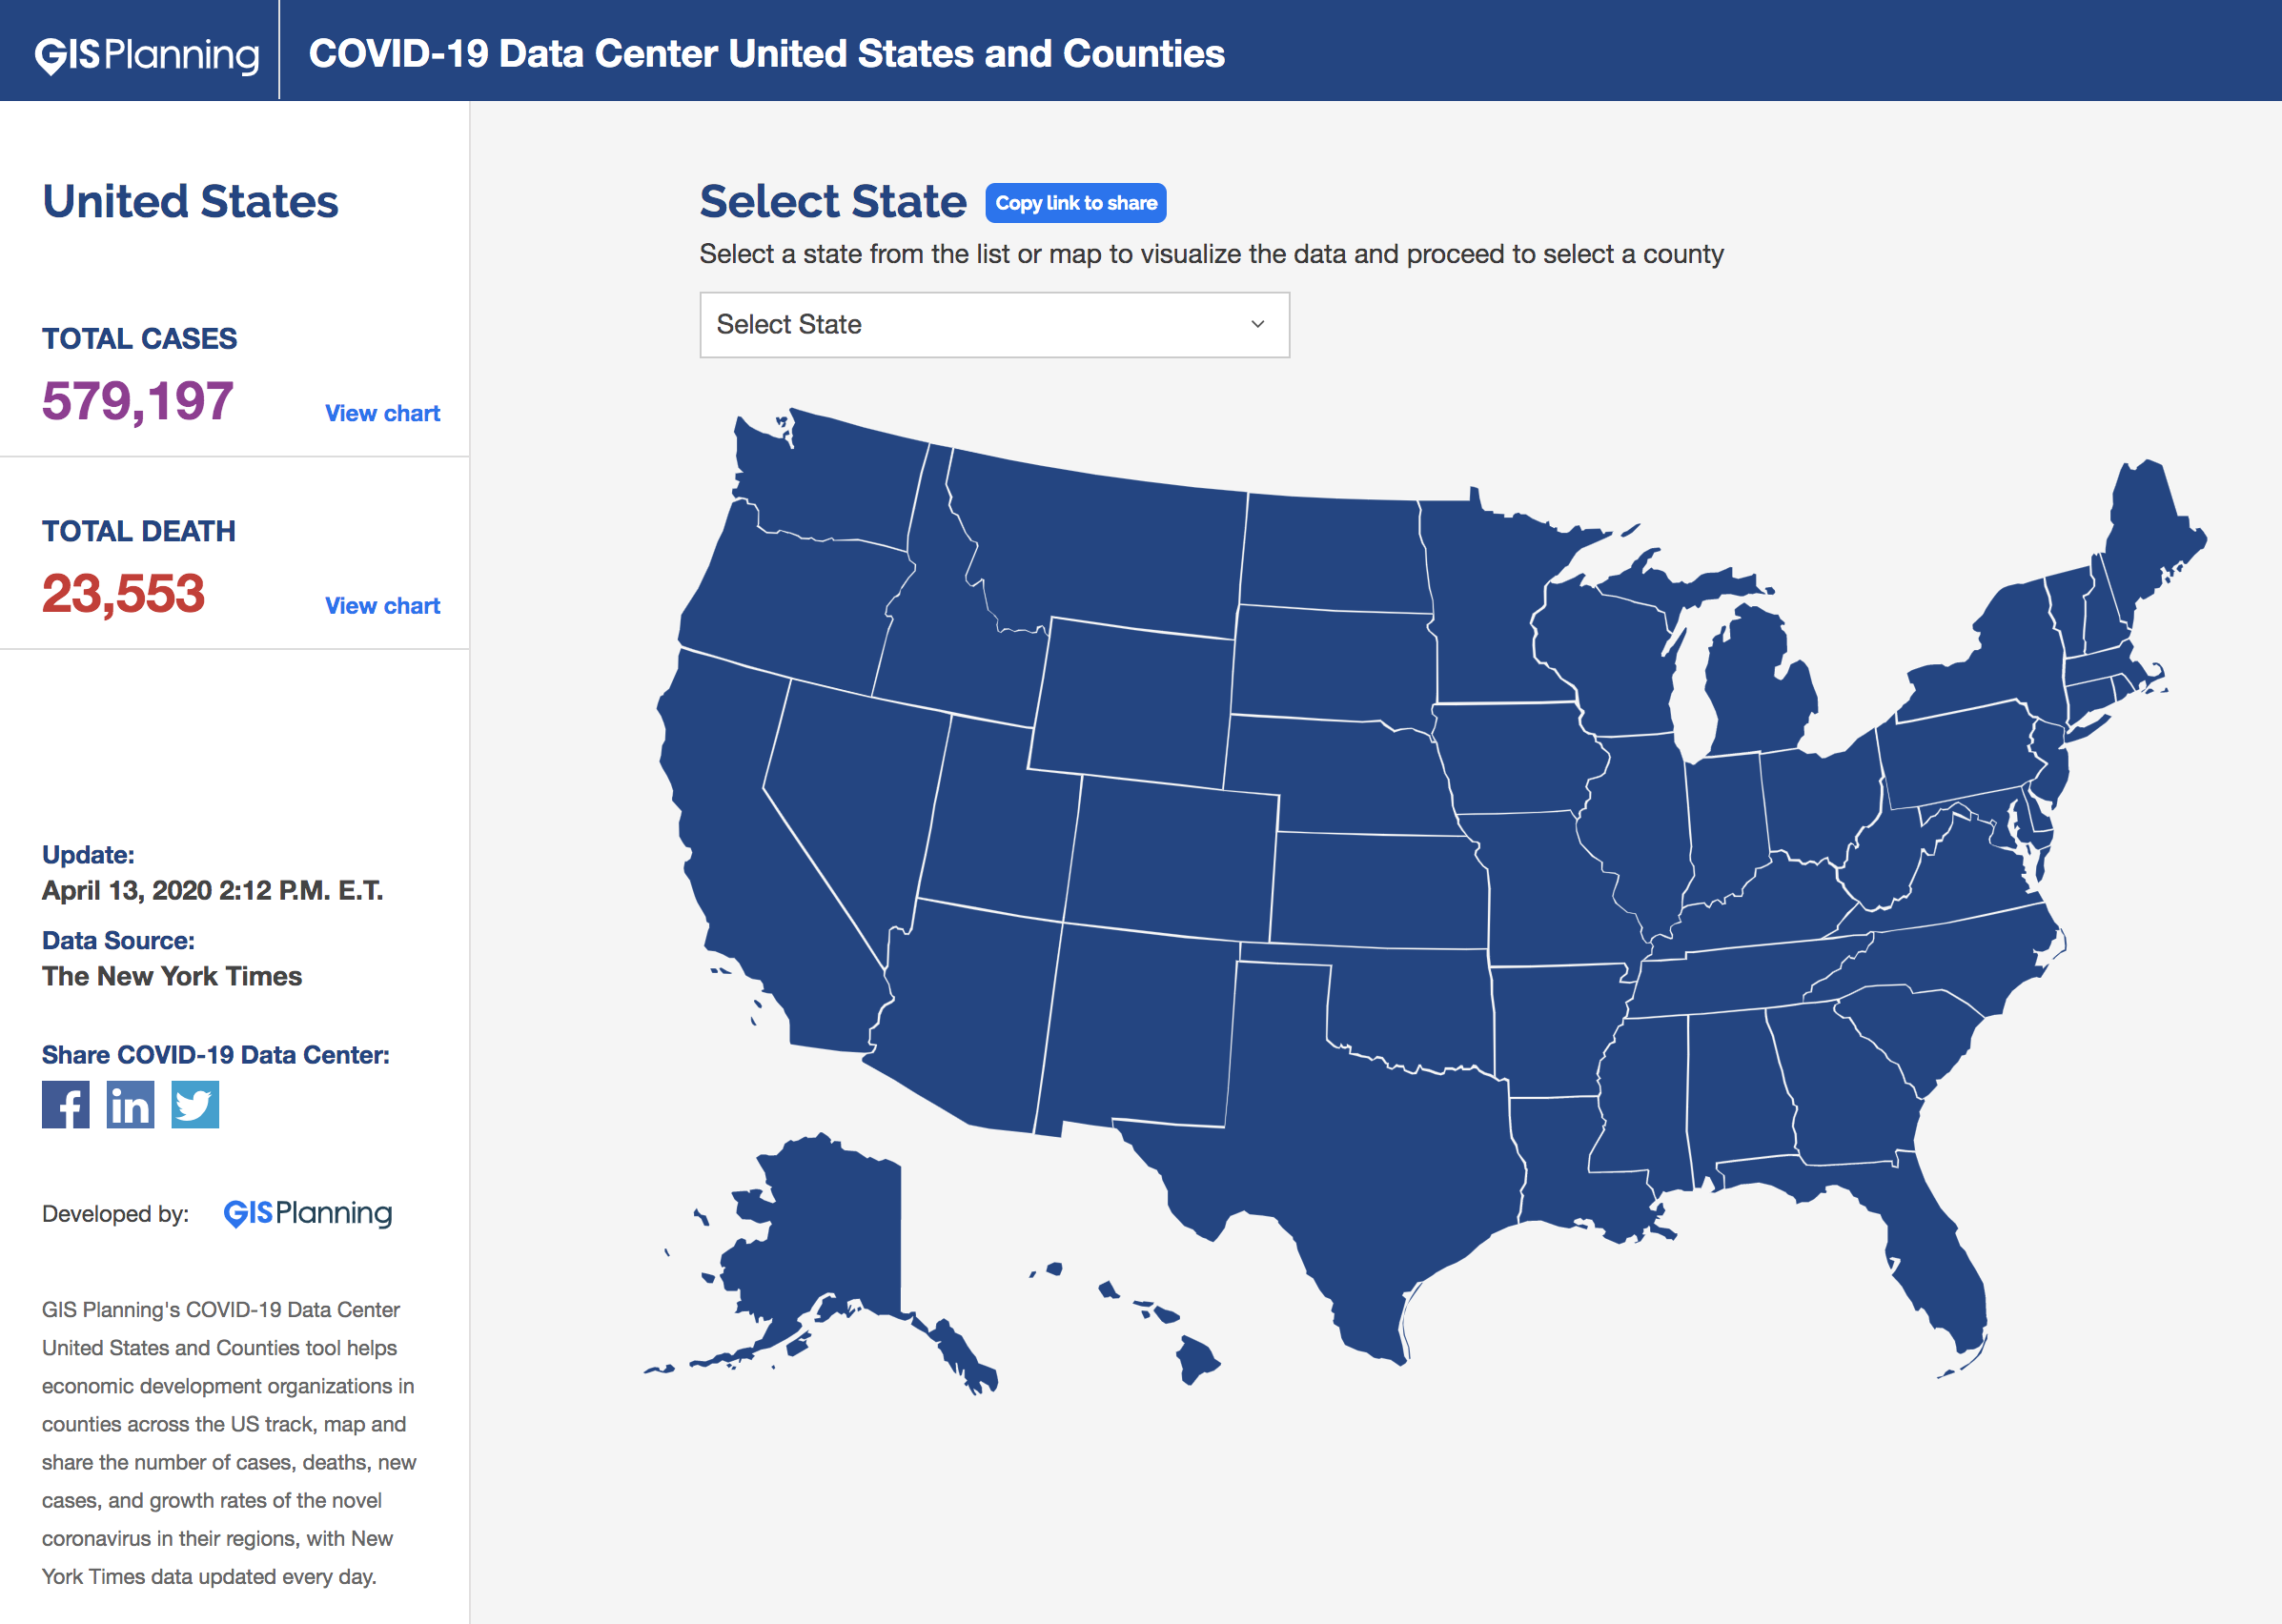 Covid-19 Data Center United States and Counties